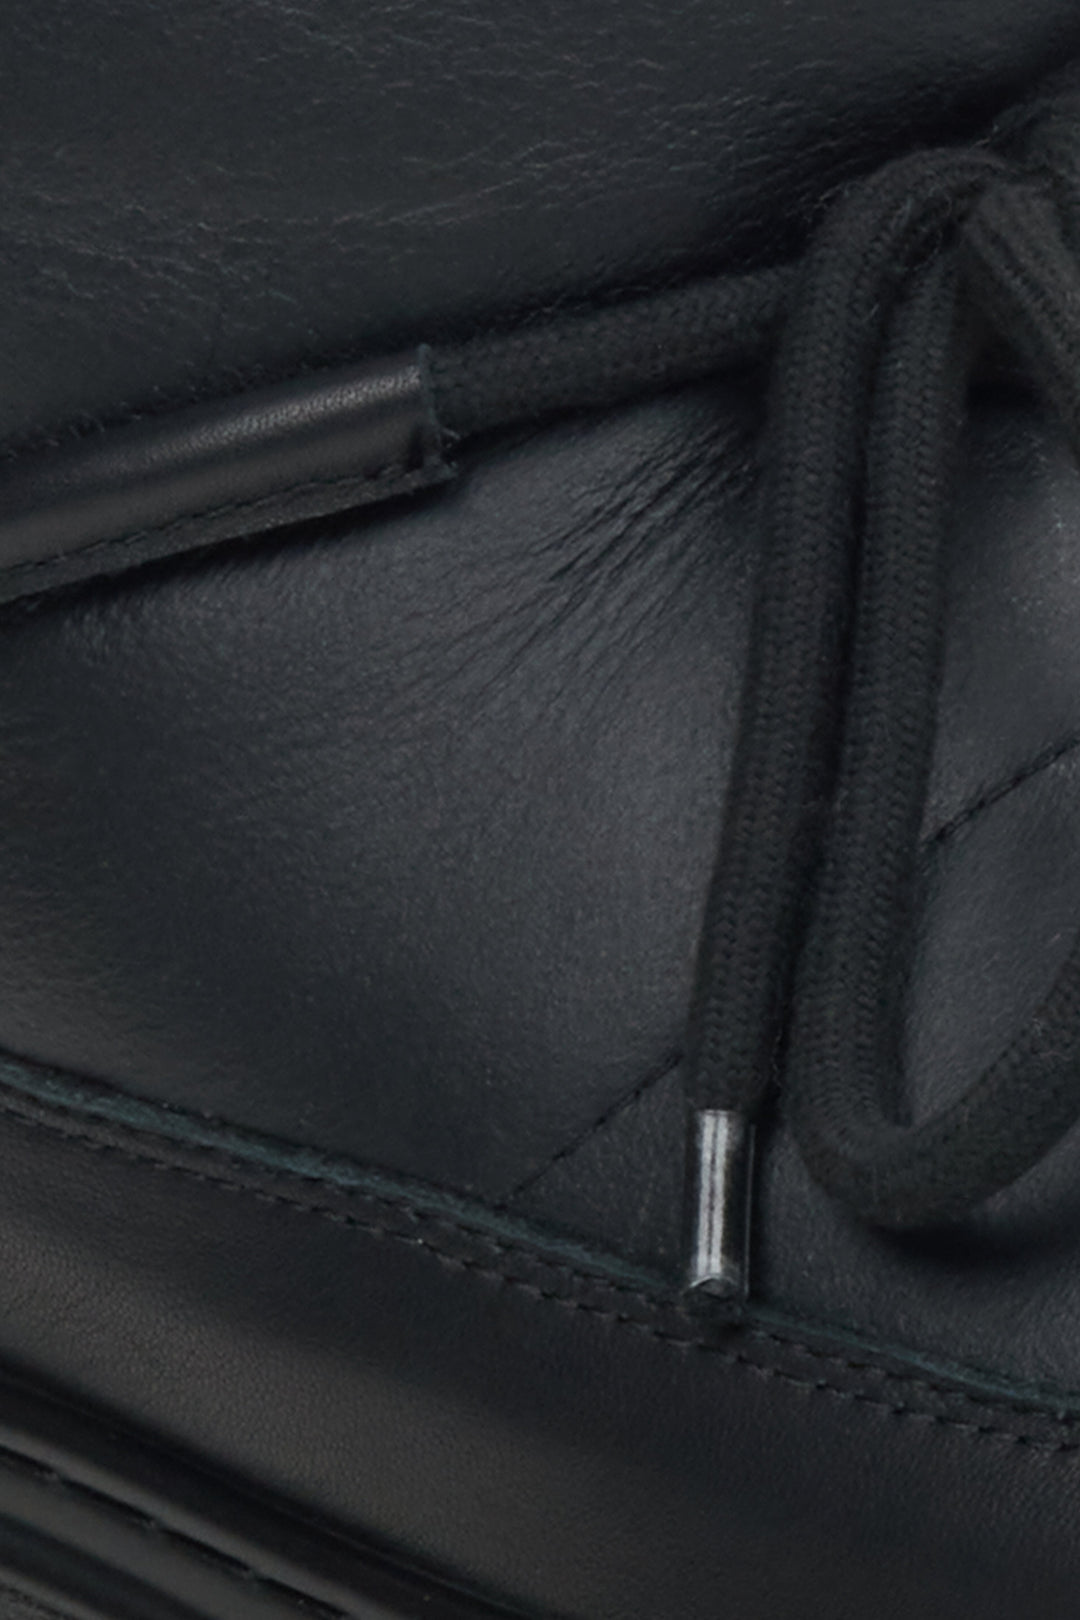 Black leather snow boots by Estro - a close-up on details.